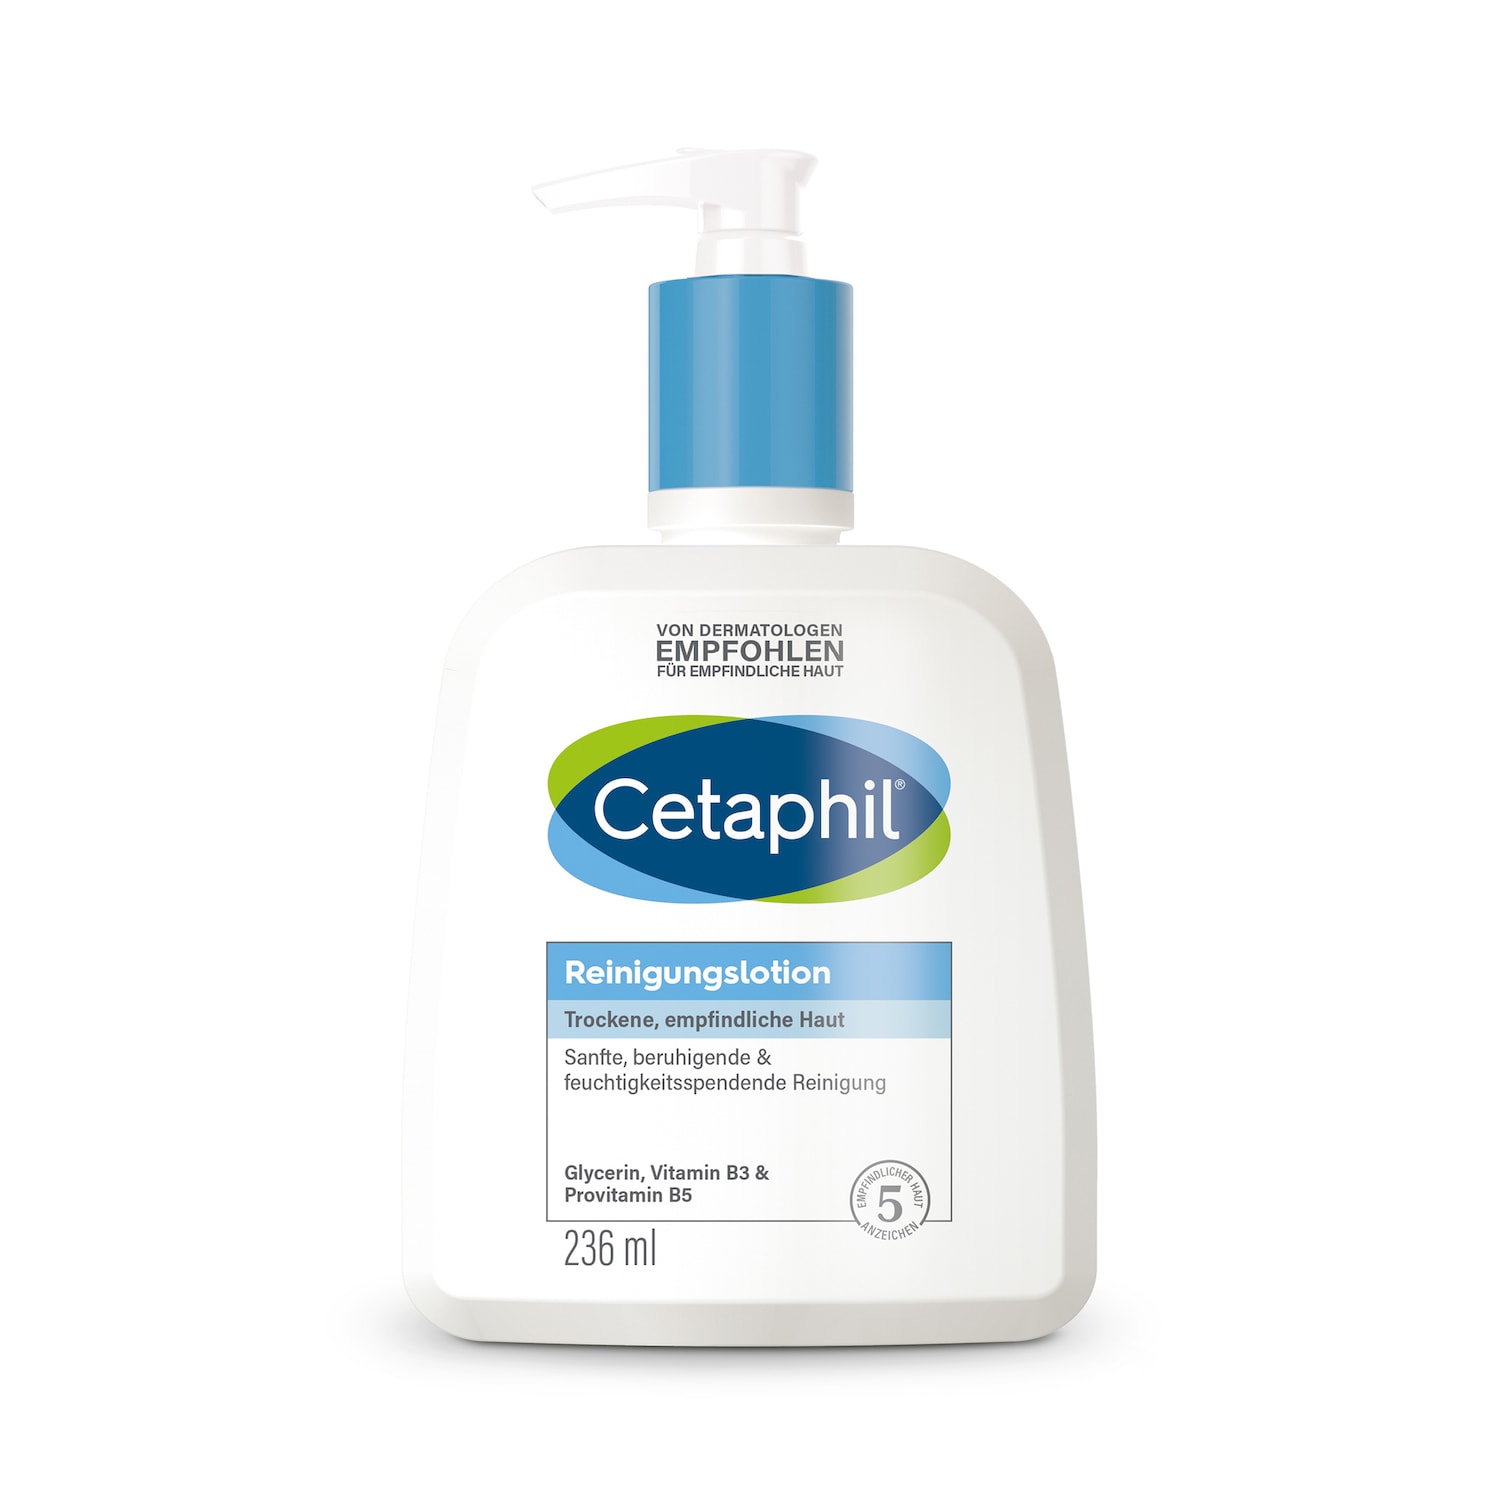 Cetaphil cleaning lotion